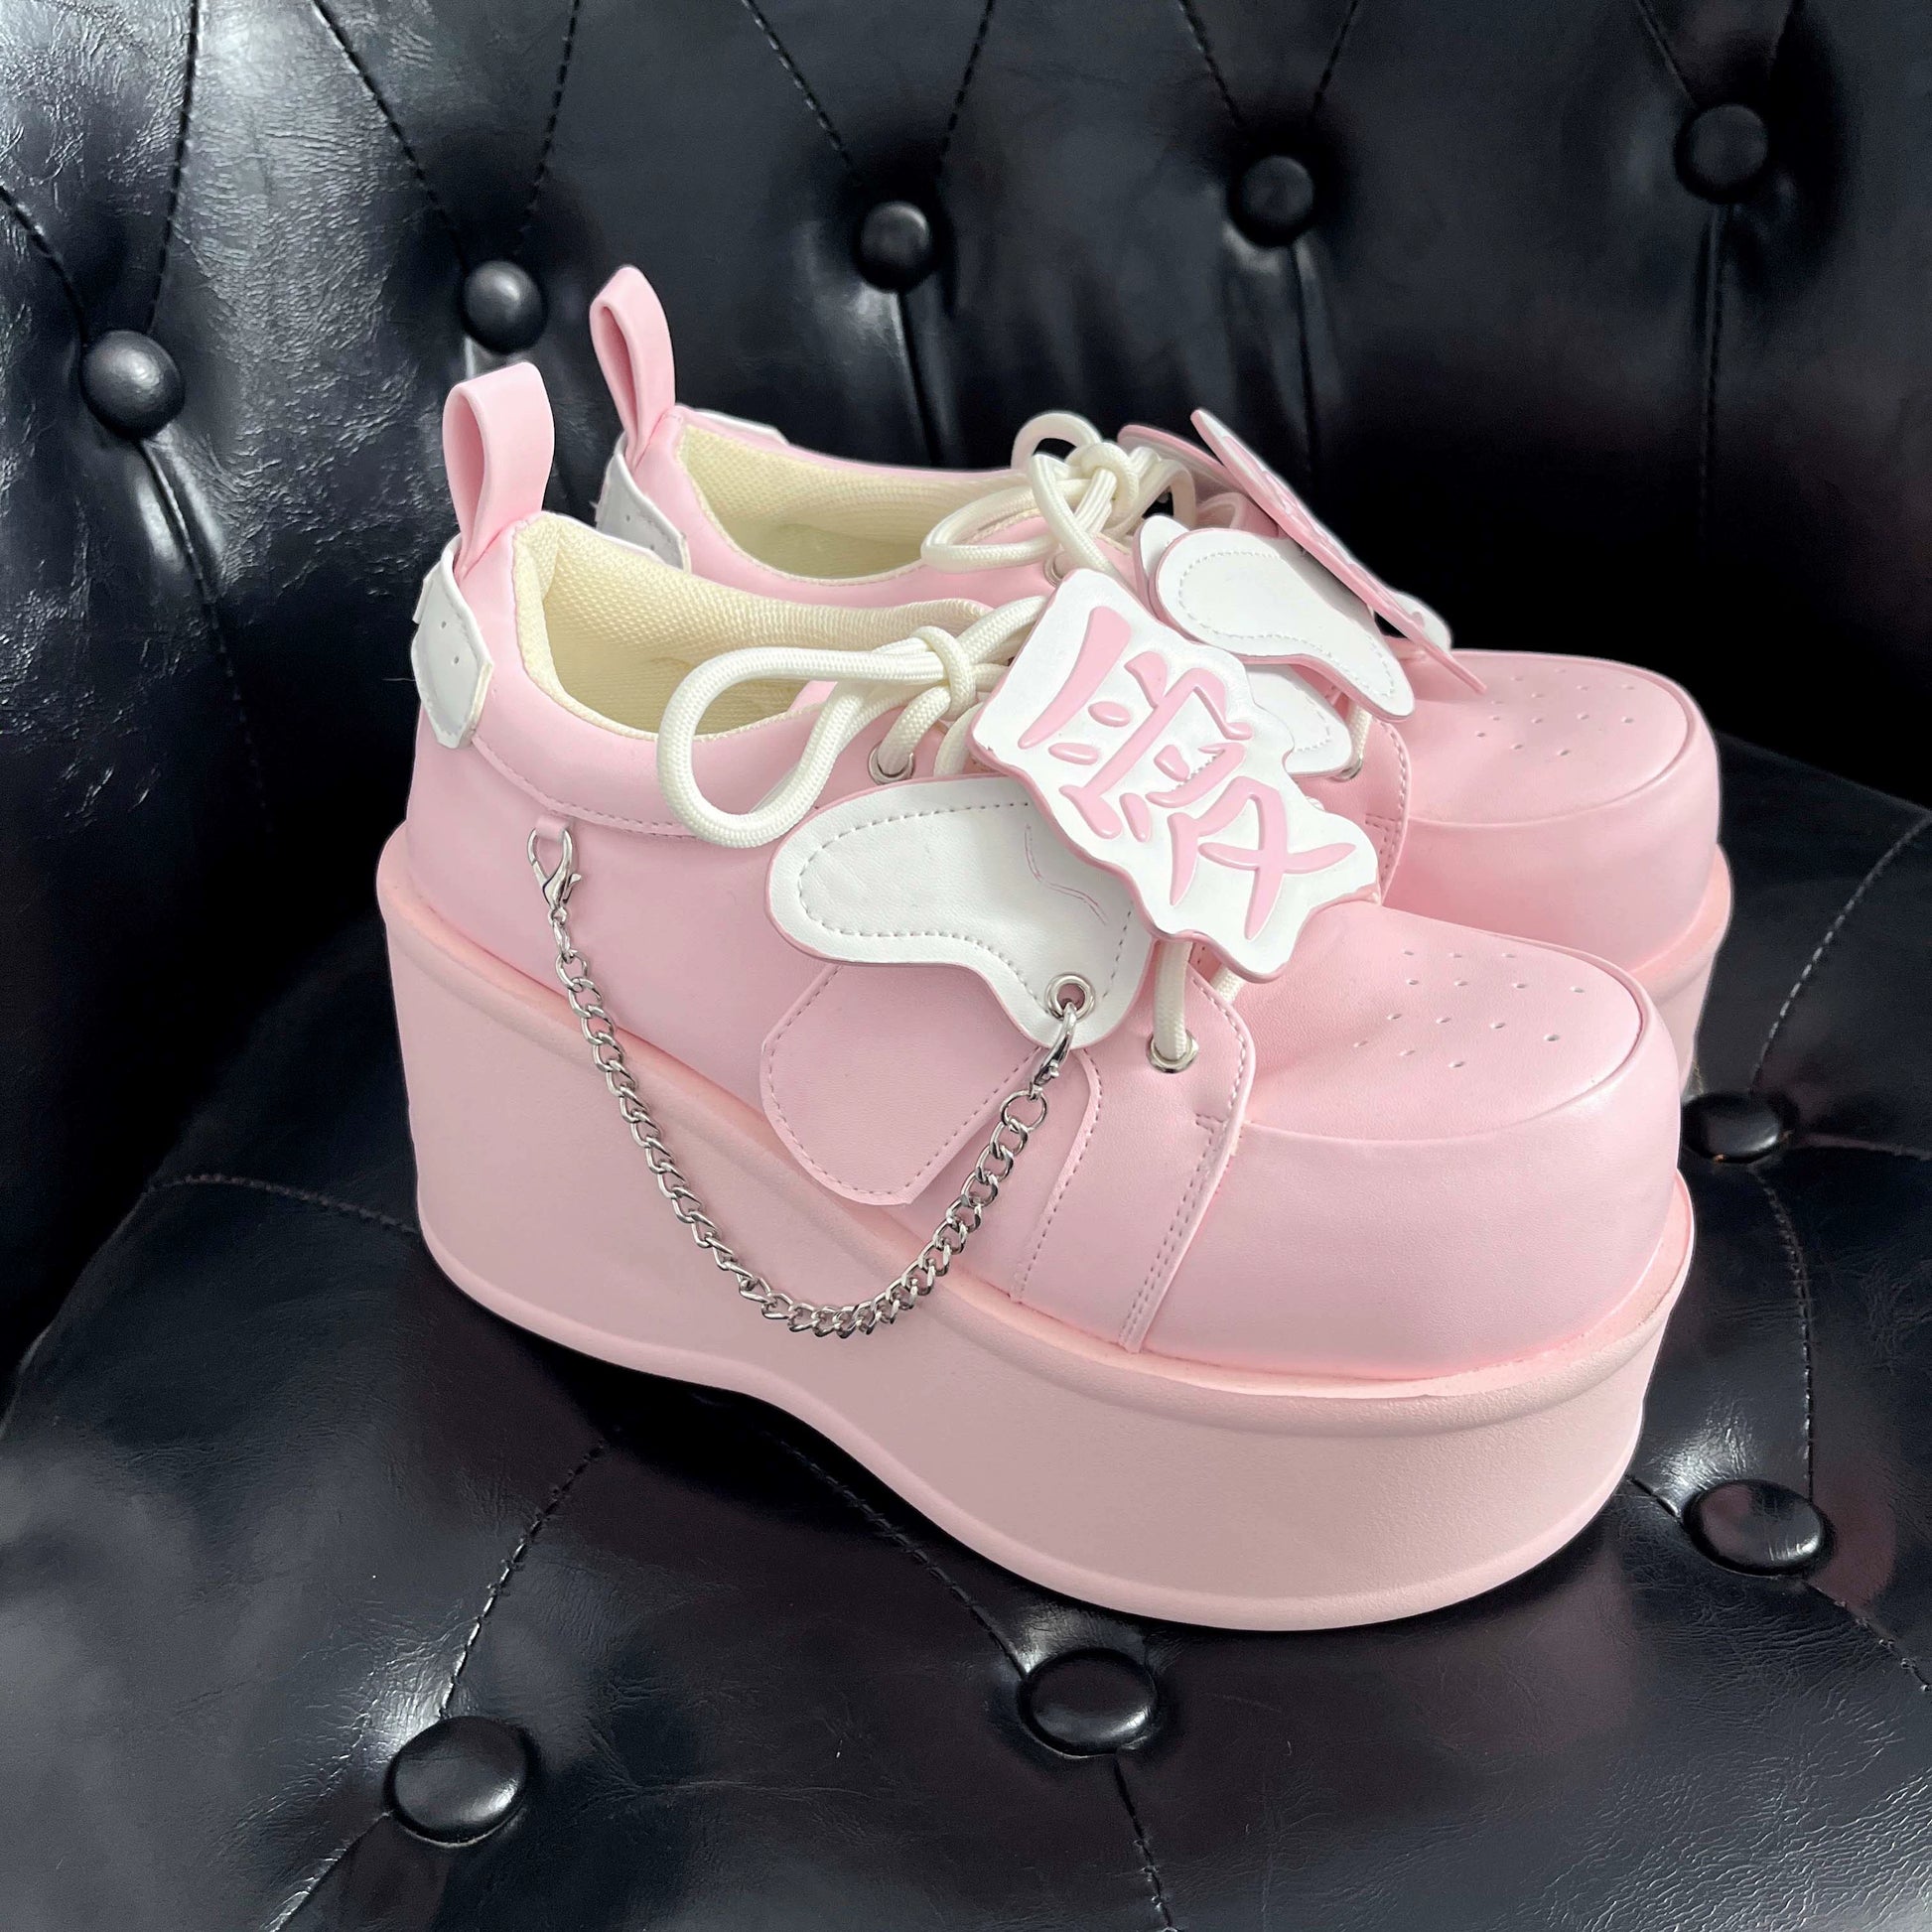 Tenshi Kaiwai Platform Shoes Subculture Thick-soled Shoes (34 35 36 37 38 39 40 / Pink) 35748:503456 (34 35 36 37 38 39 40 / Pink) 35748:503456